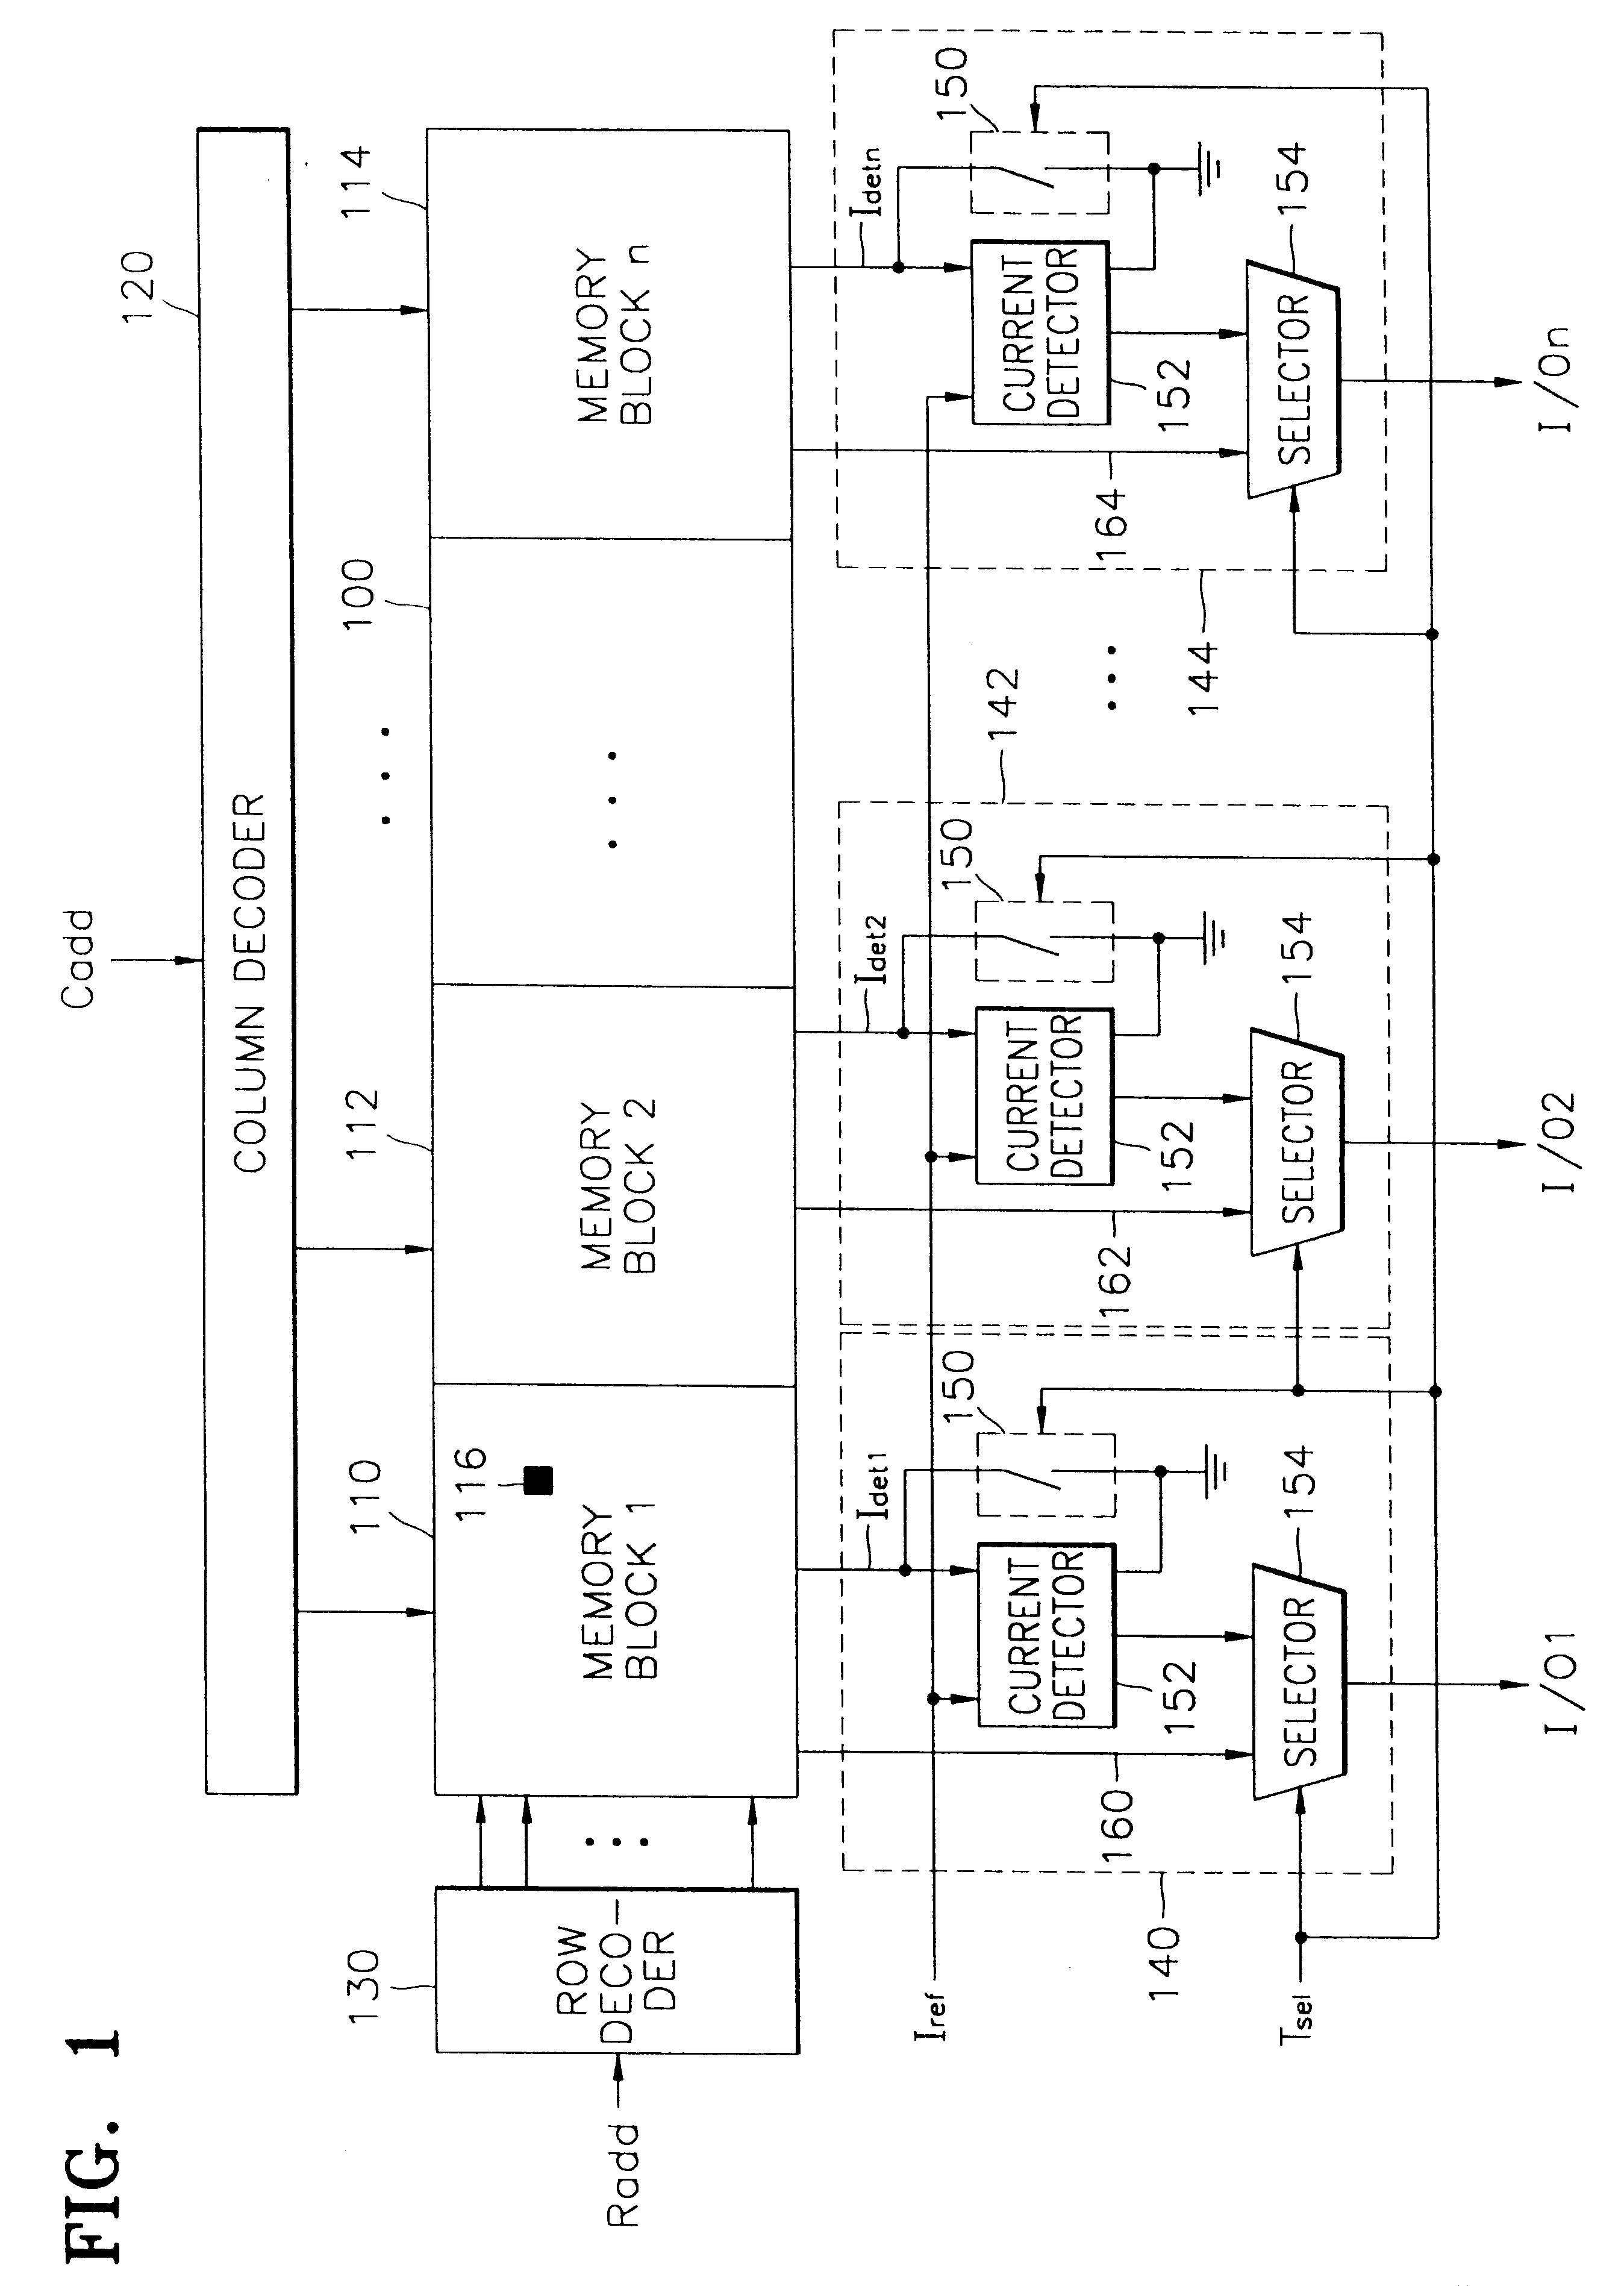 Apparatus and method for detecting faulty of cells in a semiconductor memory device